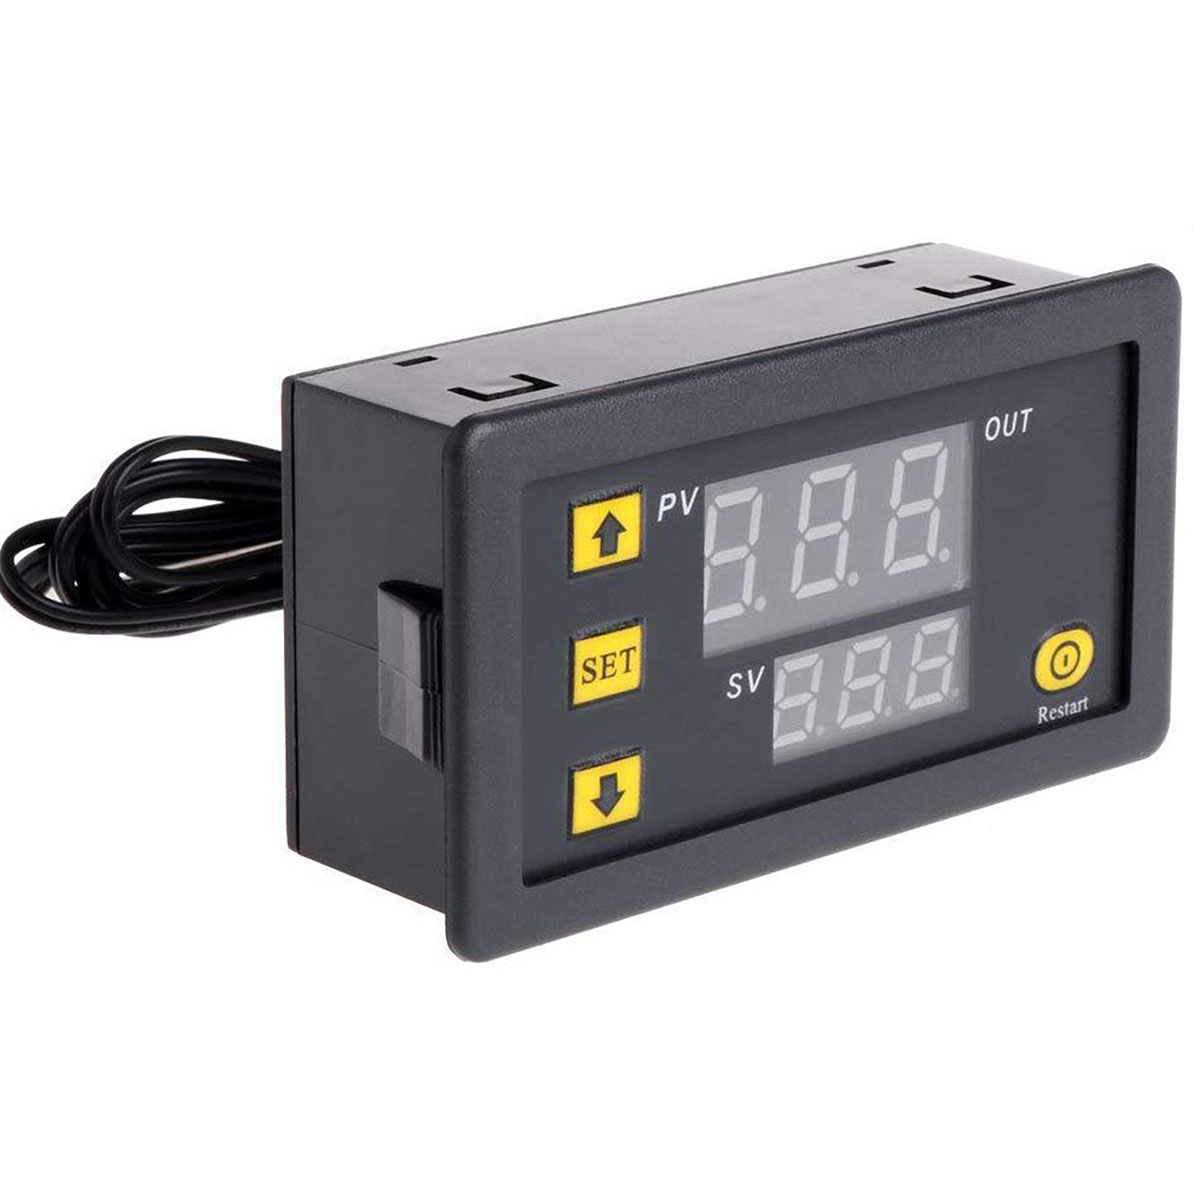 W3230 Digital Temperature Controller AC 110 220V DC 12V 24V 20A Thermostat With Heating Cooling Control Instrument LED Display